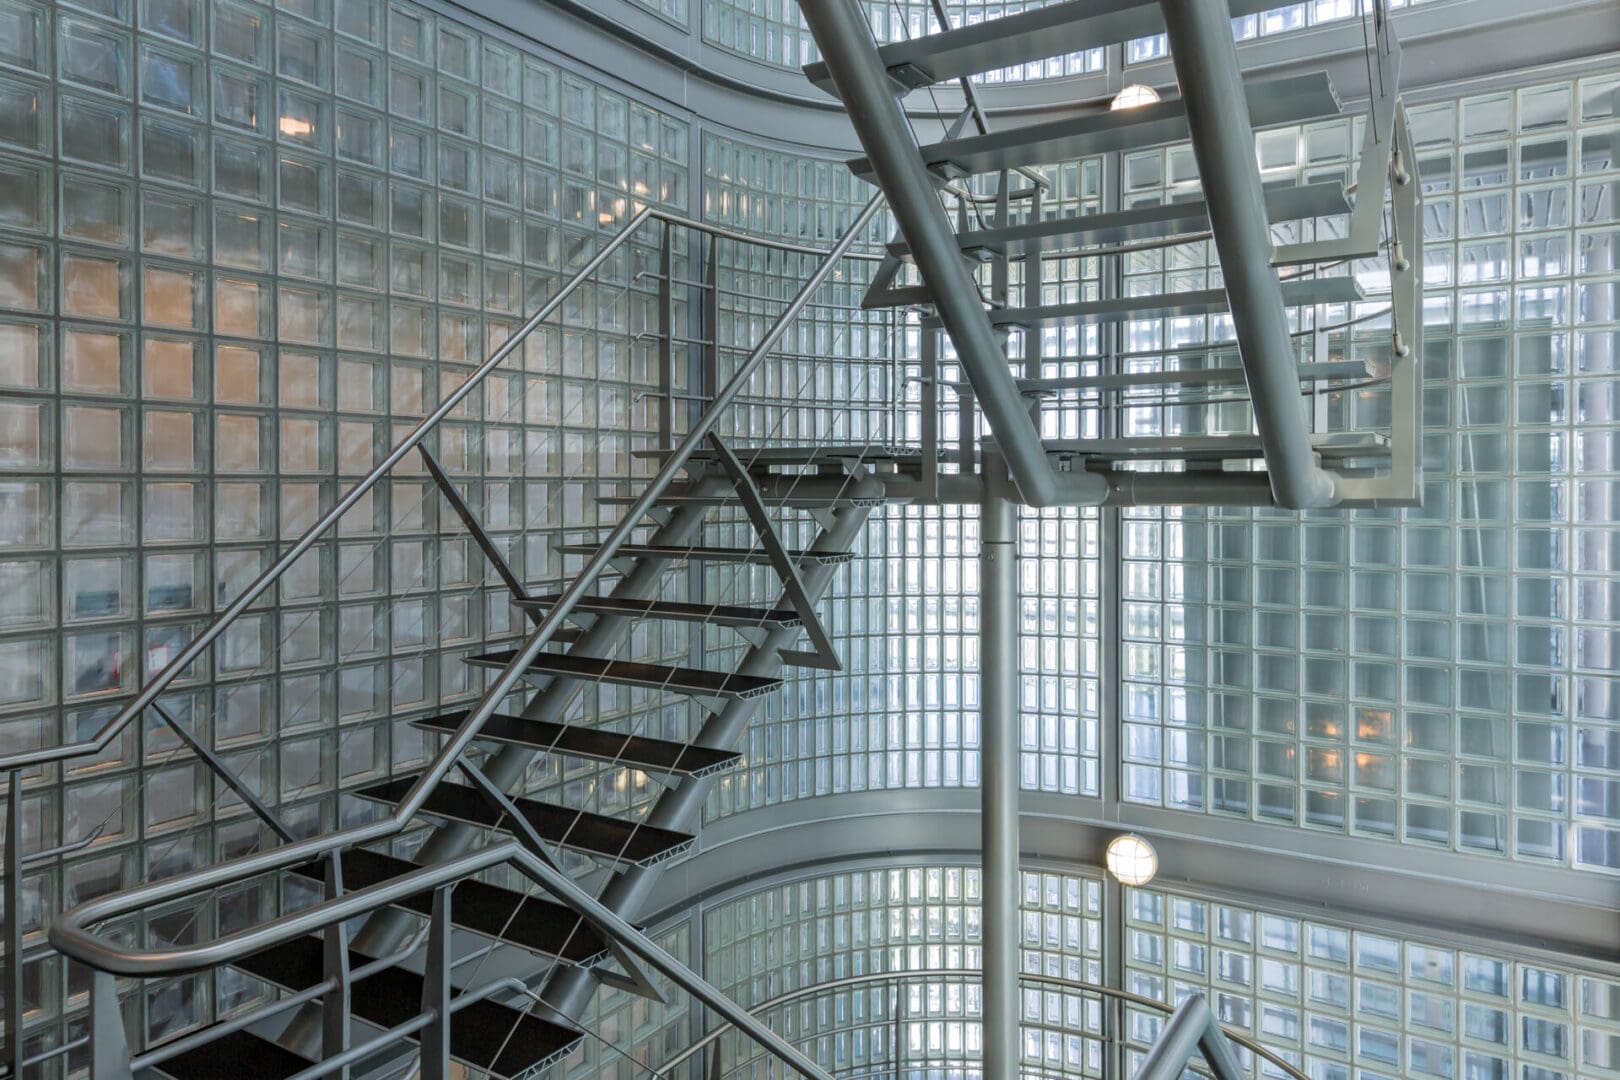 A view of some stairs in an office building.